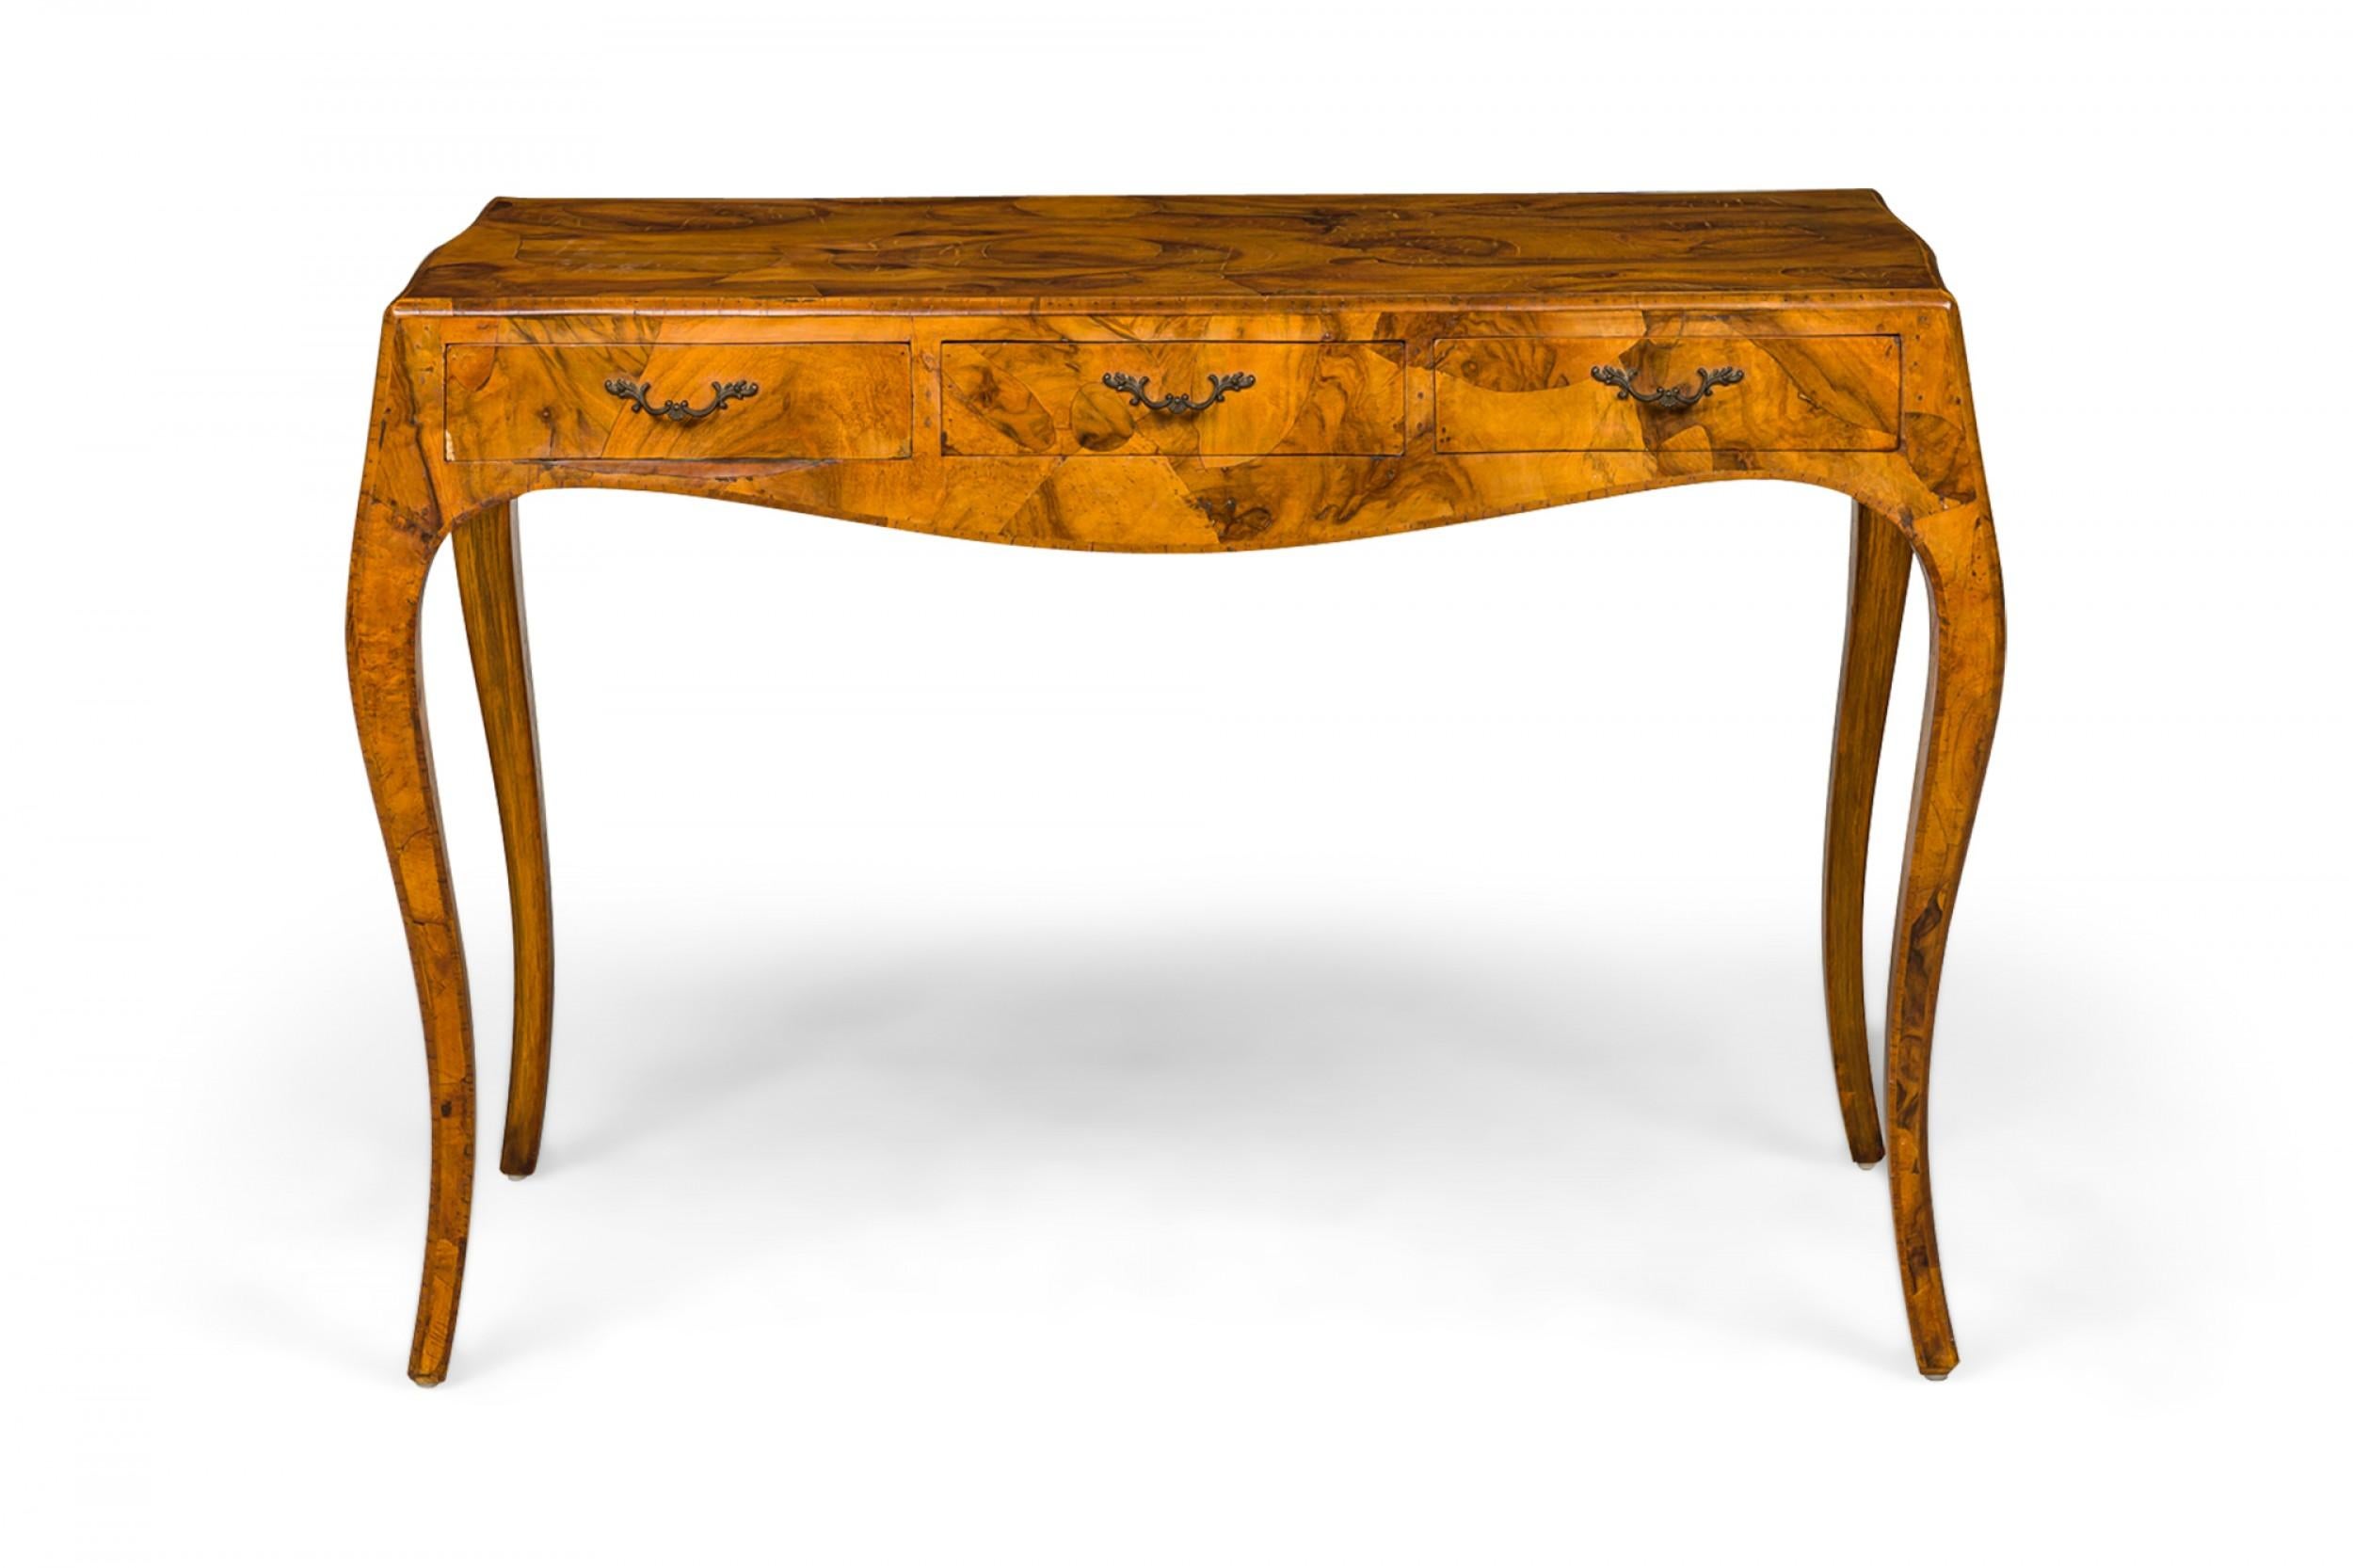 Italian mid-century rectangular writing table with oyster burl veneer and three drawers with brass drawer pulls, resting on four cabriole legs.
   